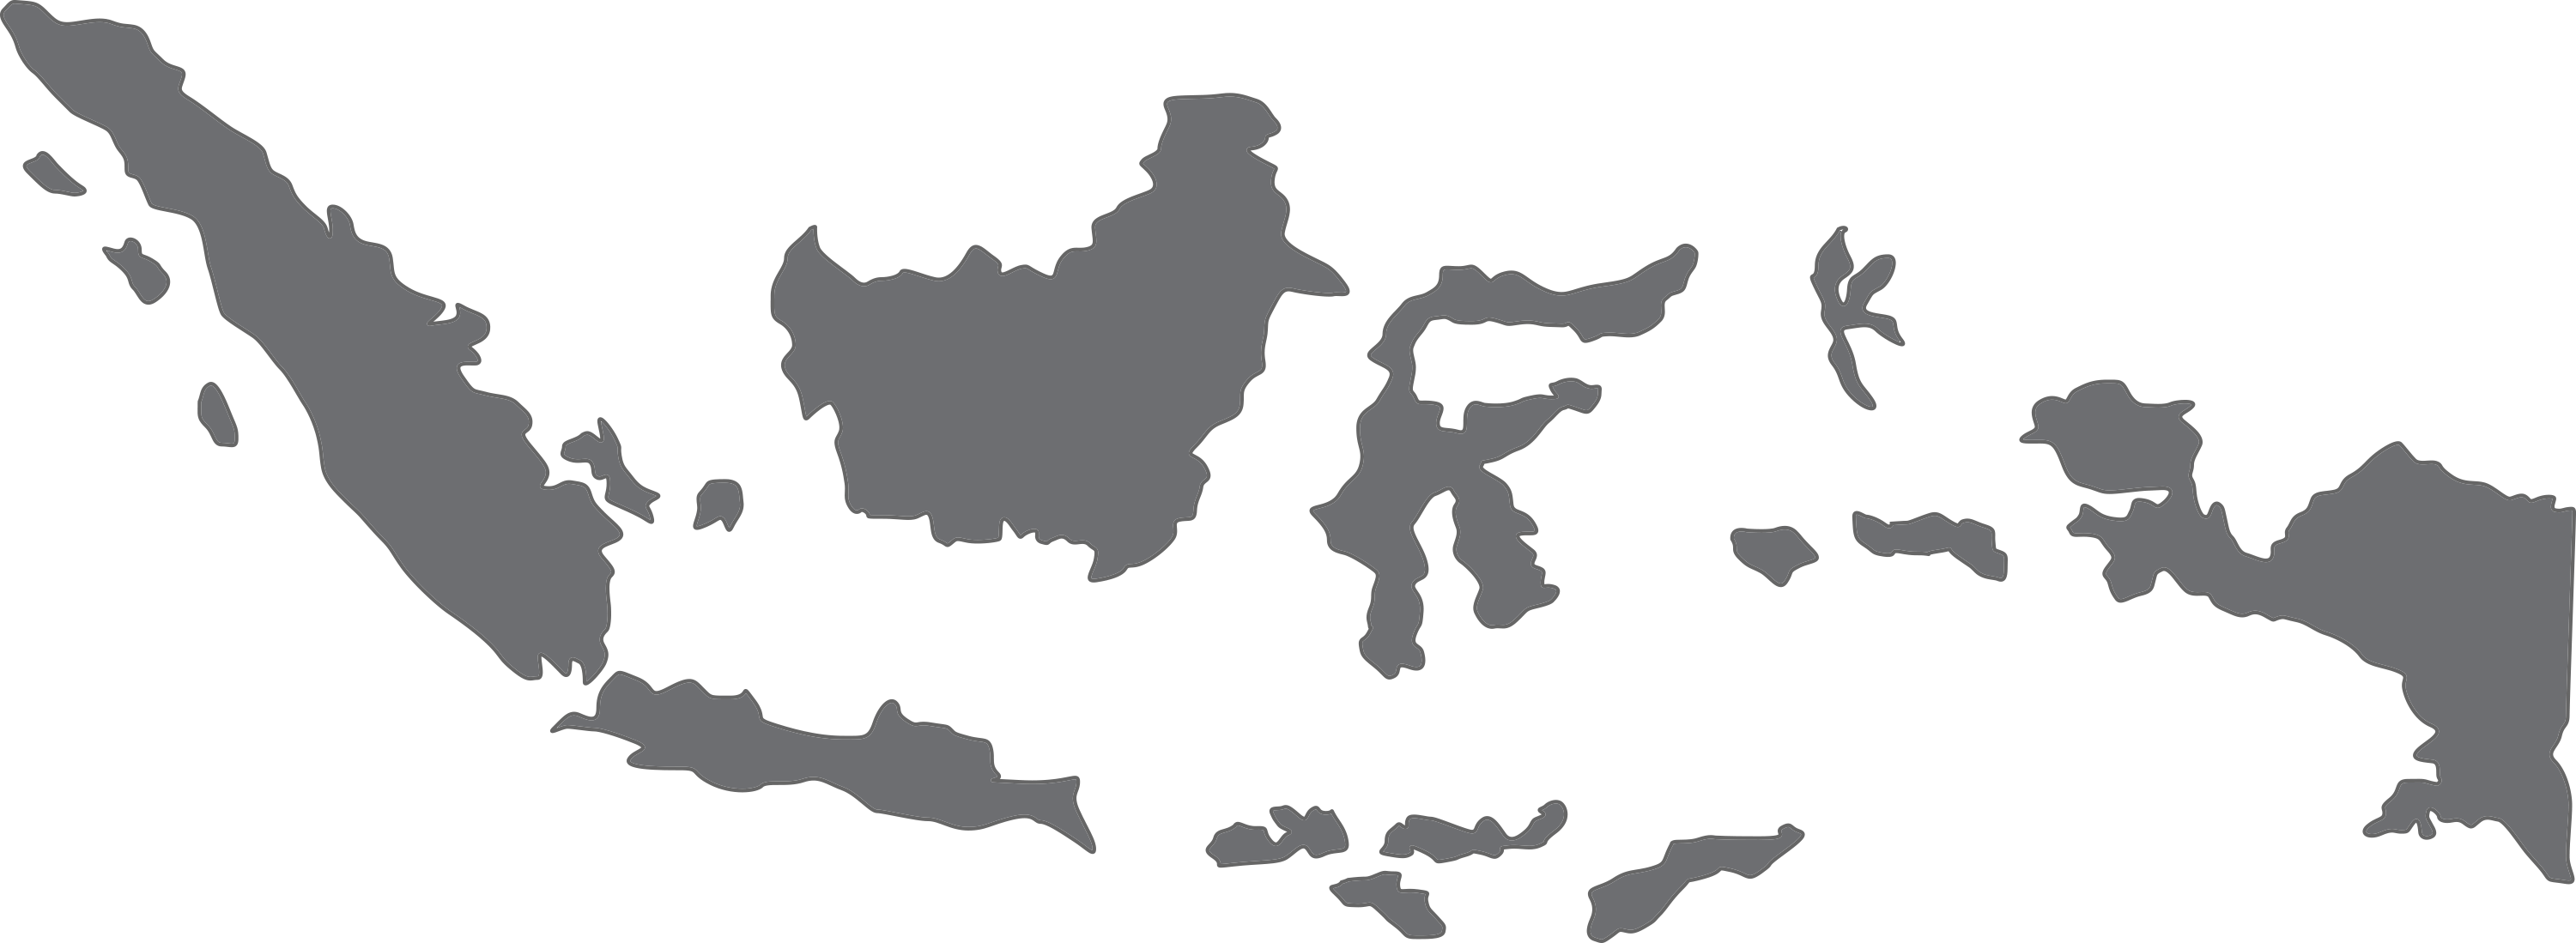 Download Indonesia Map Png PNG Image with No Background - PNGkey.com